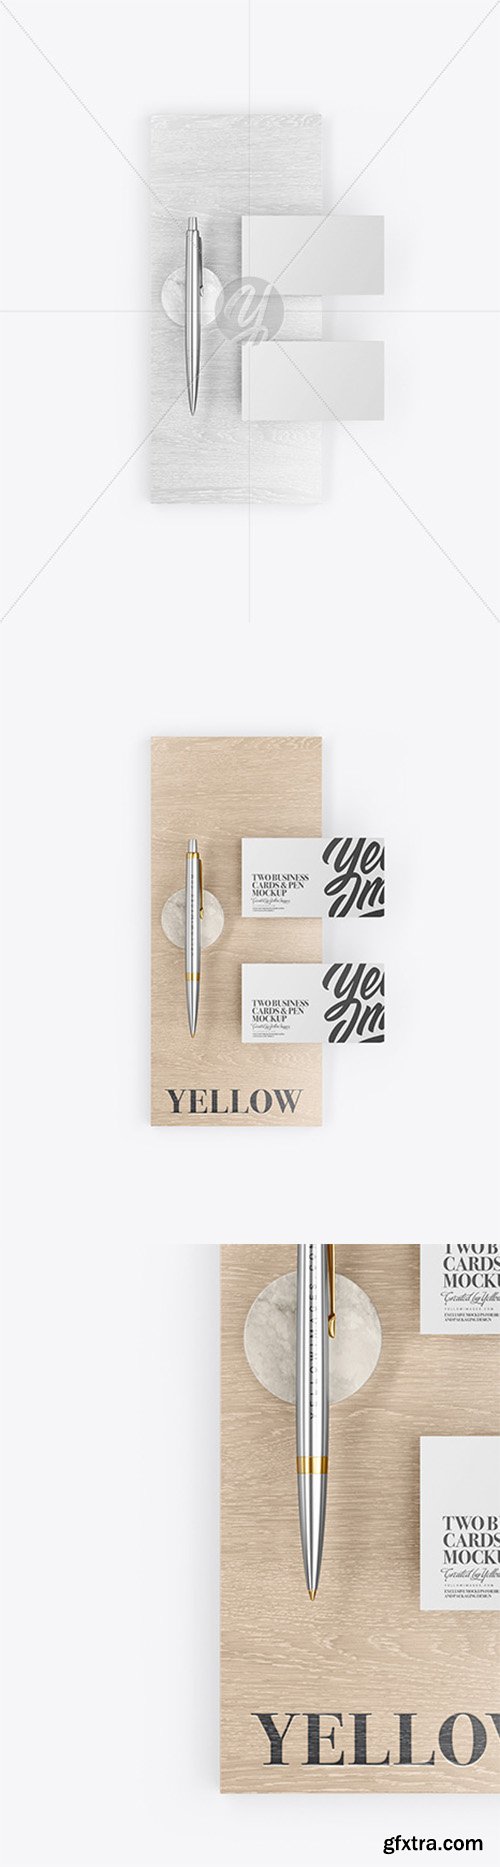 Two Business Cards & Pen with Wood Mockup 63430